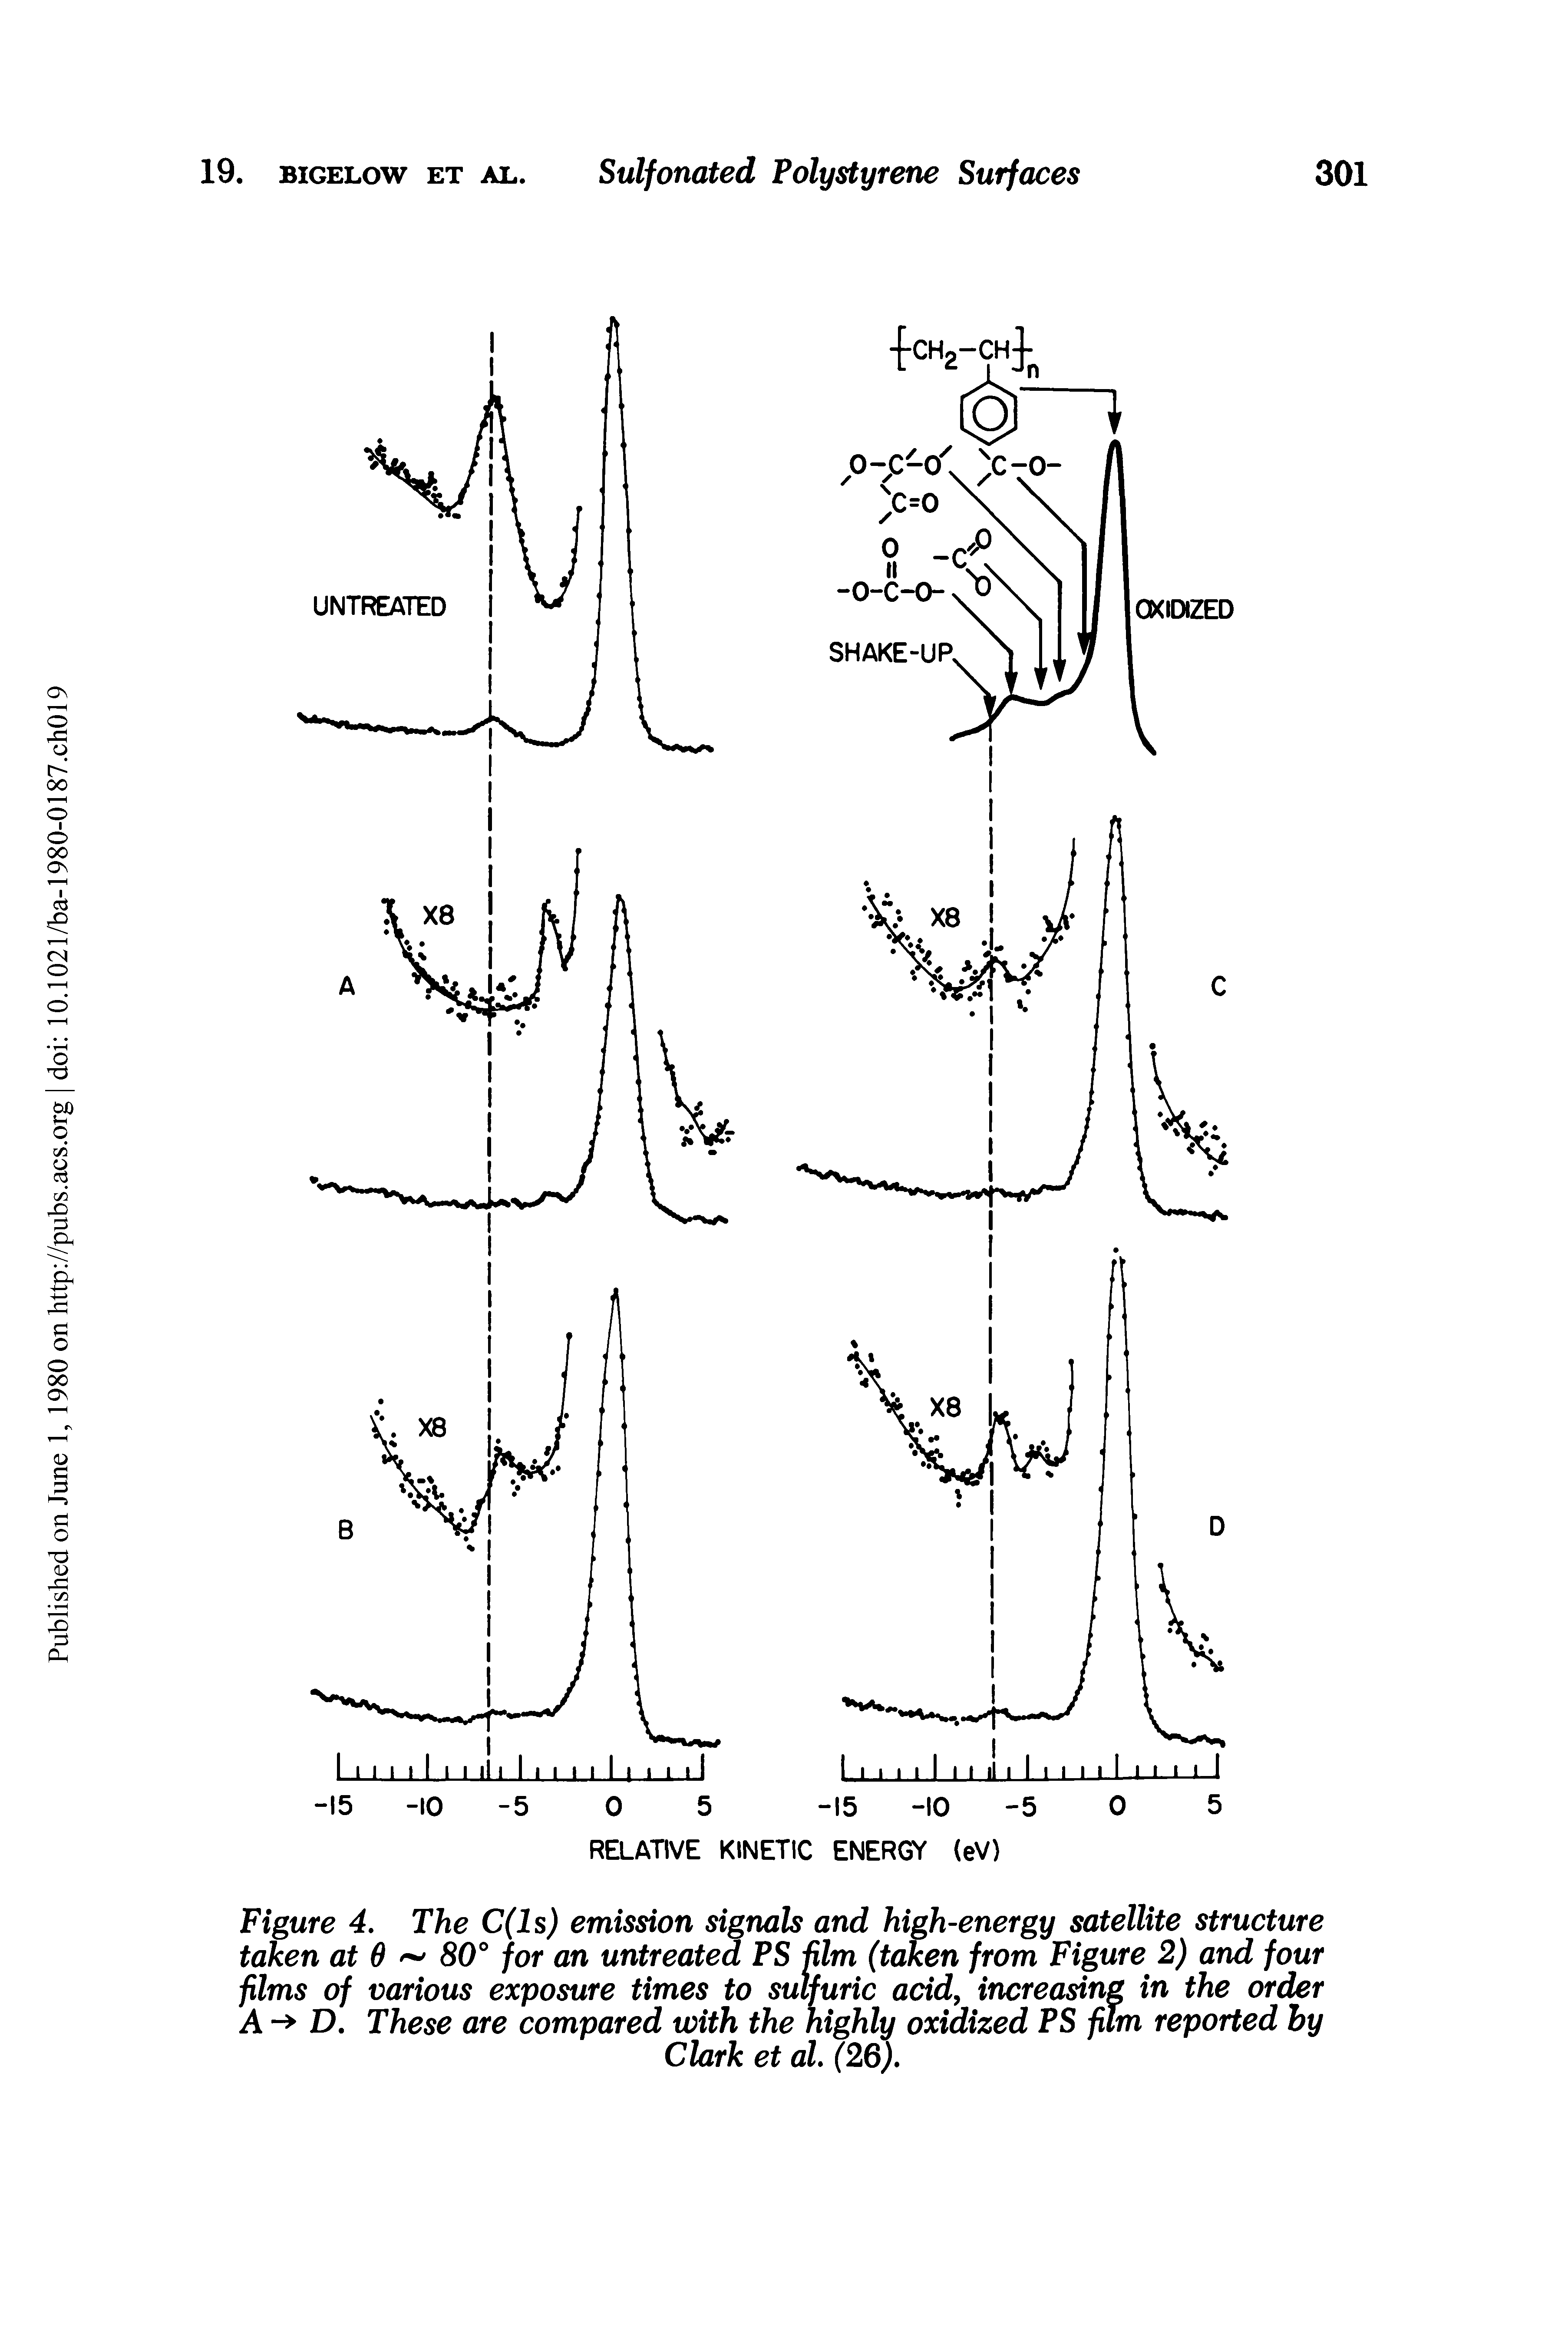 Figure 4. The C(ls) emission signals and high-energy satellite structure taken at 0 80° for an untreated PS film (taken from Figure 2) and four films of various exposure times to sulfuric acid, increasing in the order A - D. These are compared with the highly oxidized PS film reported by...